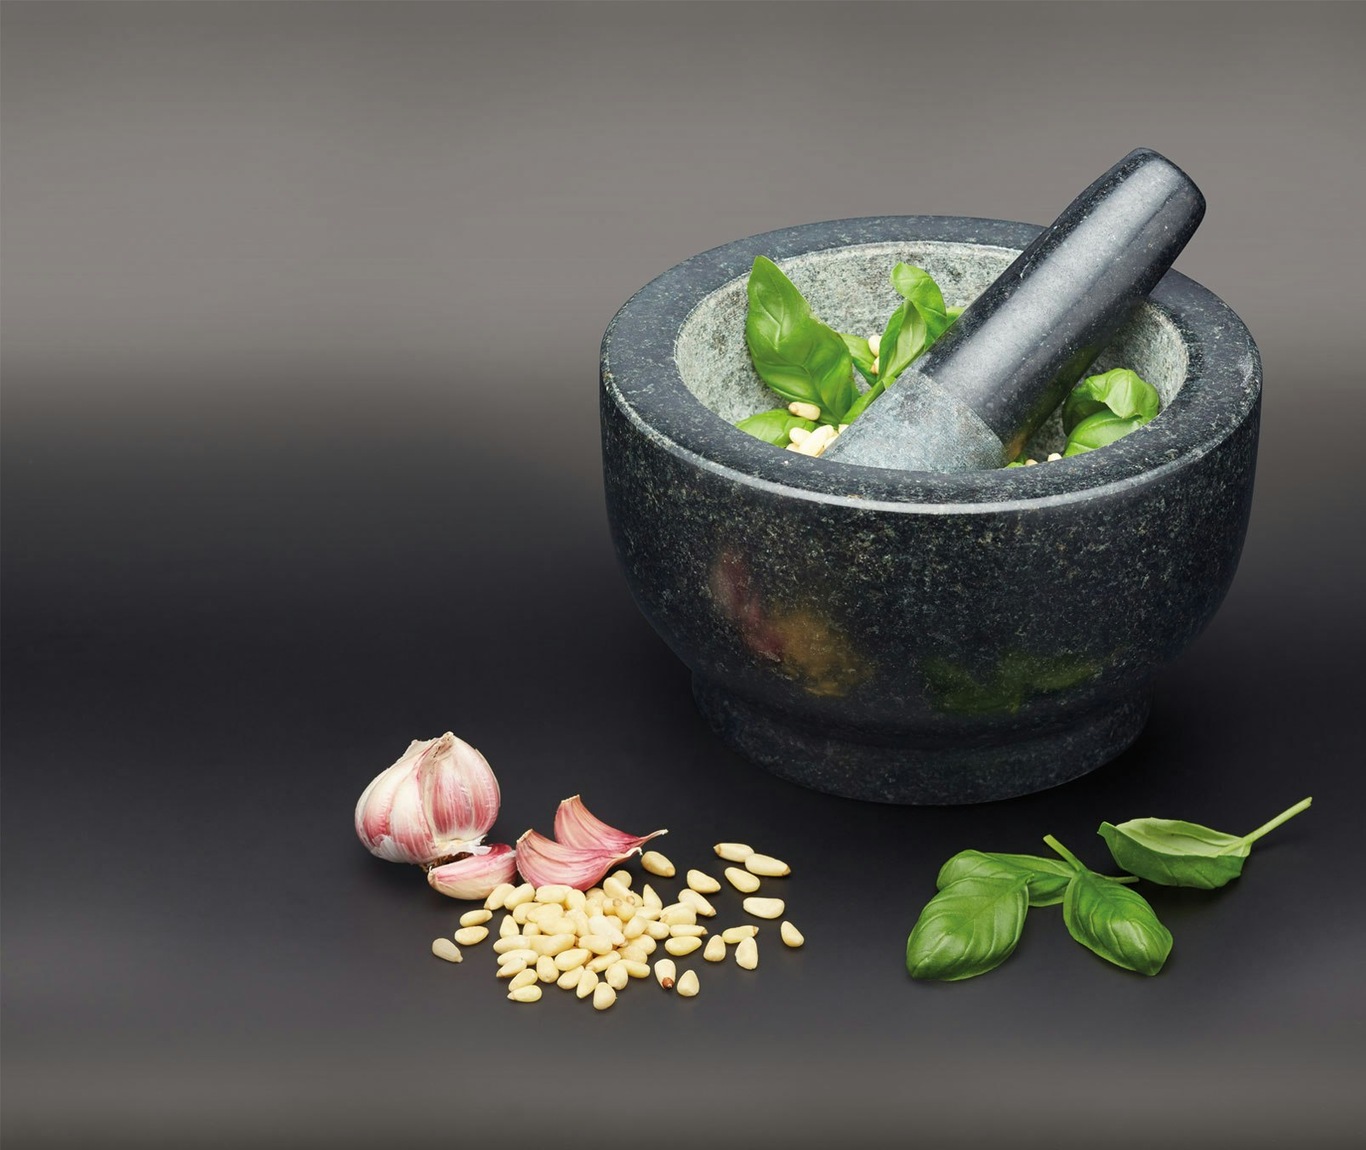 Granite Pestle and Mortar, a Gorgeous 12cm Round Pestle and Mortar. the  Ultimate Granite Pestle and Mortar Set. Grinds Herbs and Spices. 